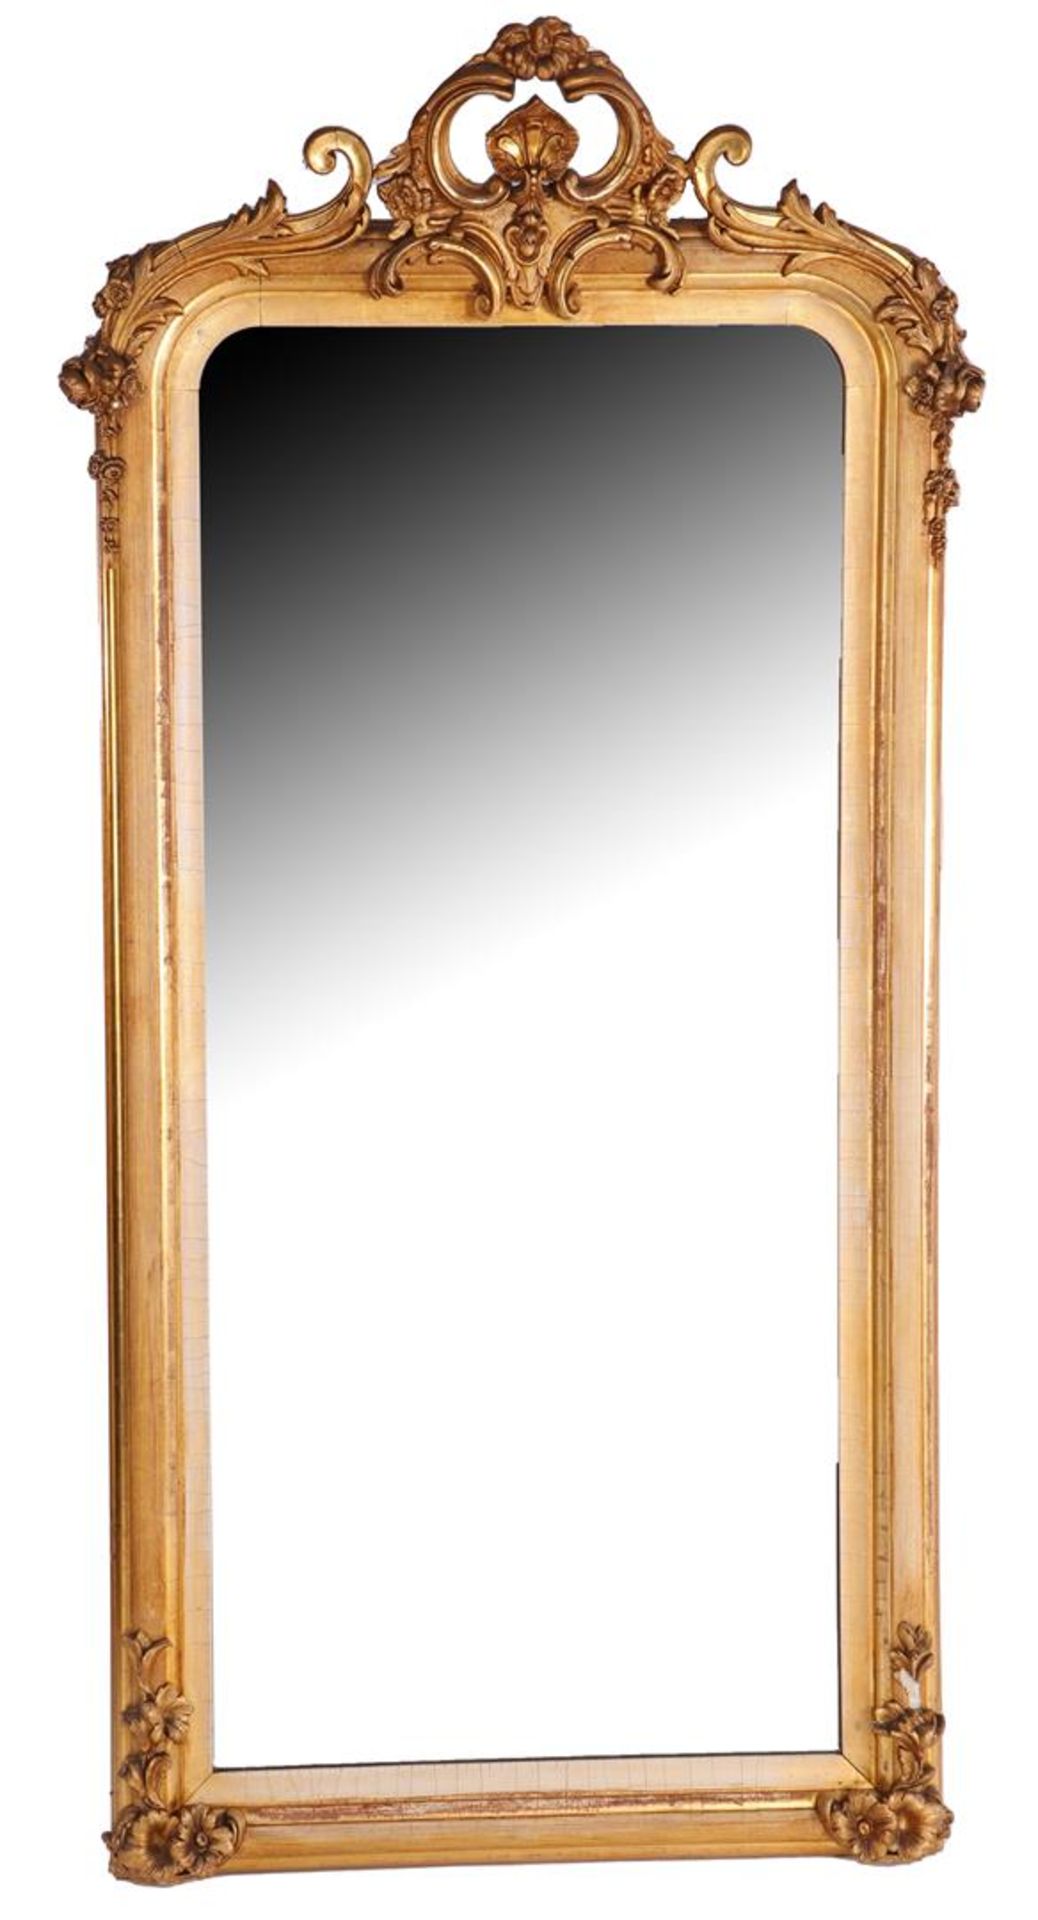 Mirror in gold-colored, richly carved wooden with plaster frame